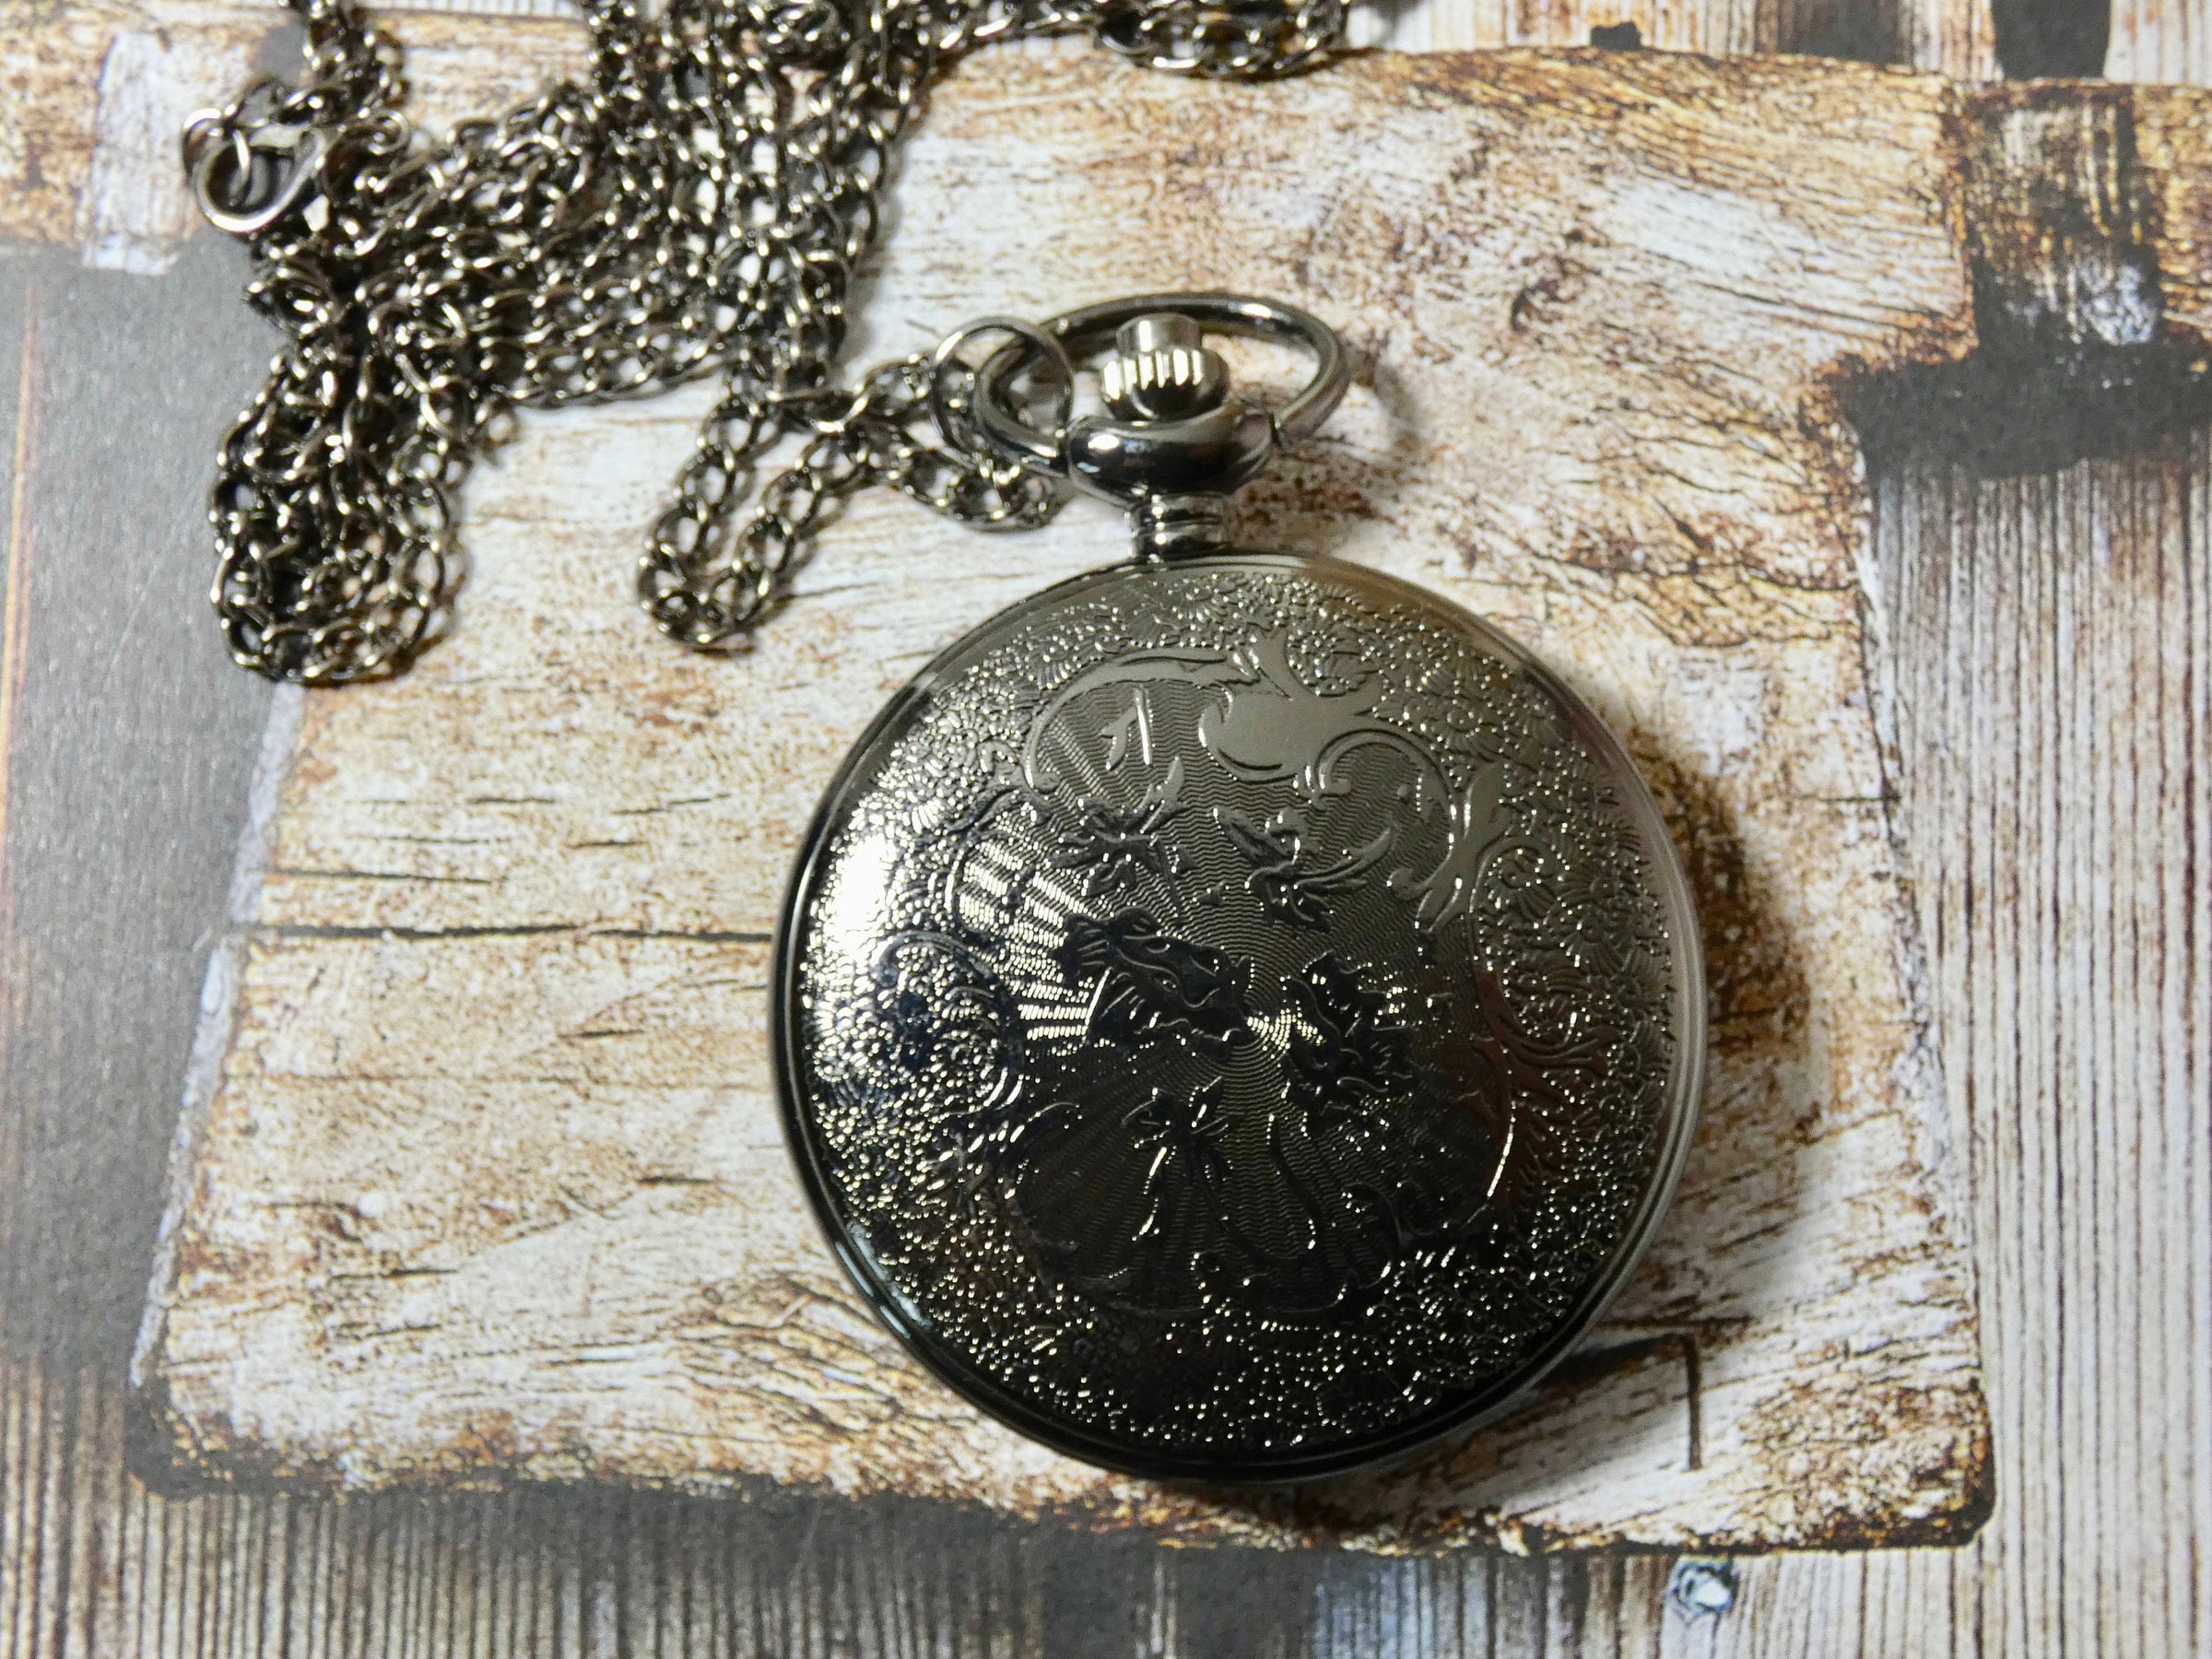 Pocket Watch Necklace • Working Large Face Watch • Gunmetal Watch Necklace with open face